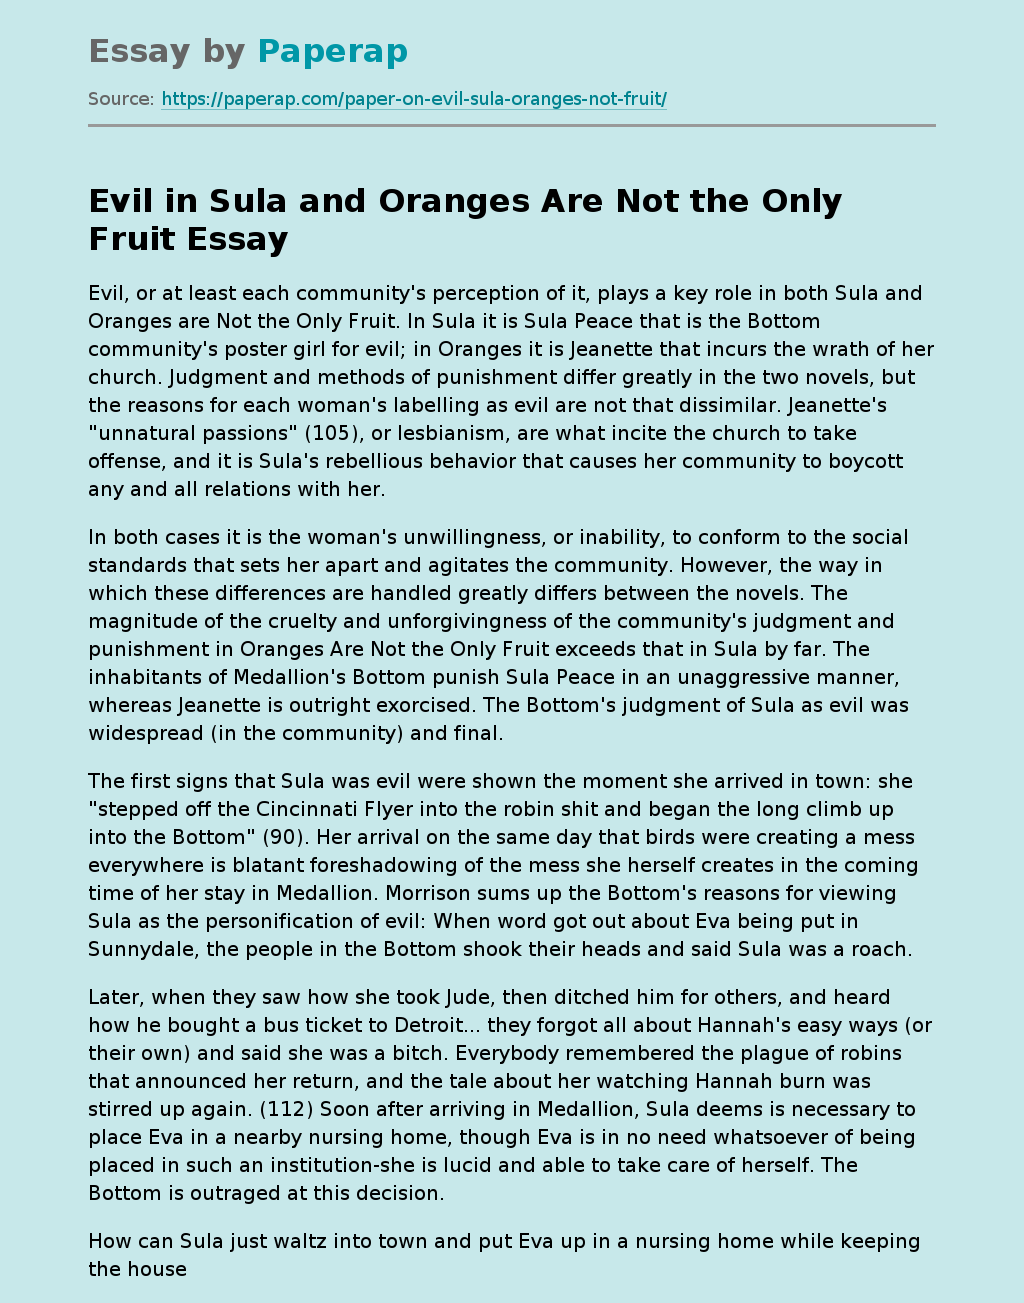 Evil in "Sula" and "Oranges Are Not the Only Fruit"